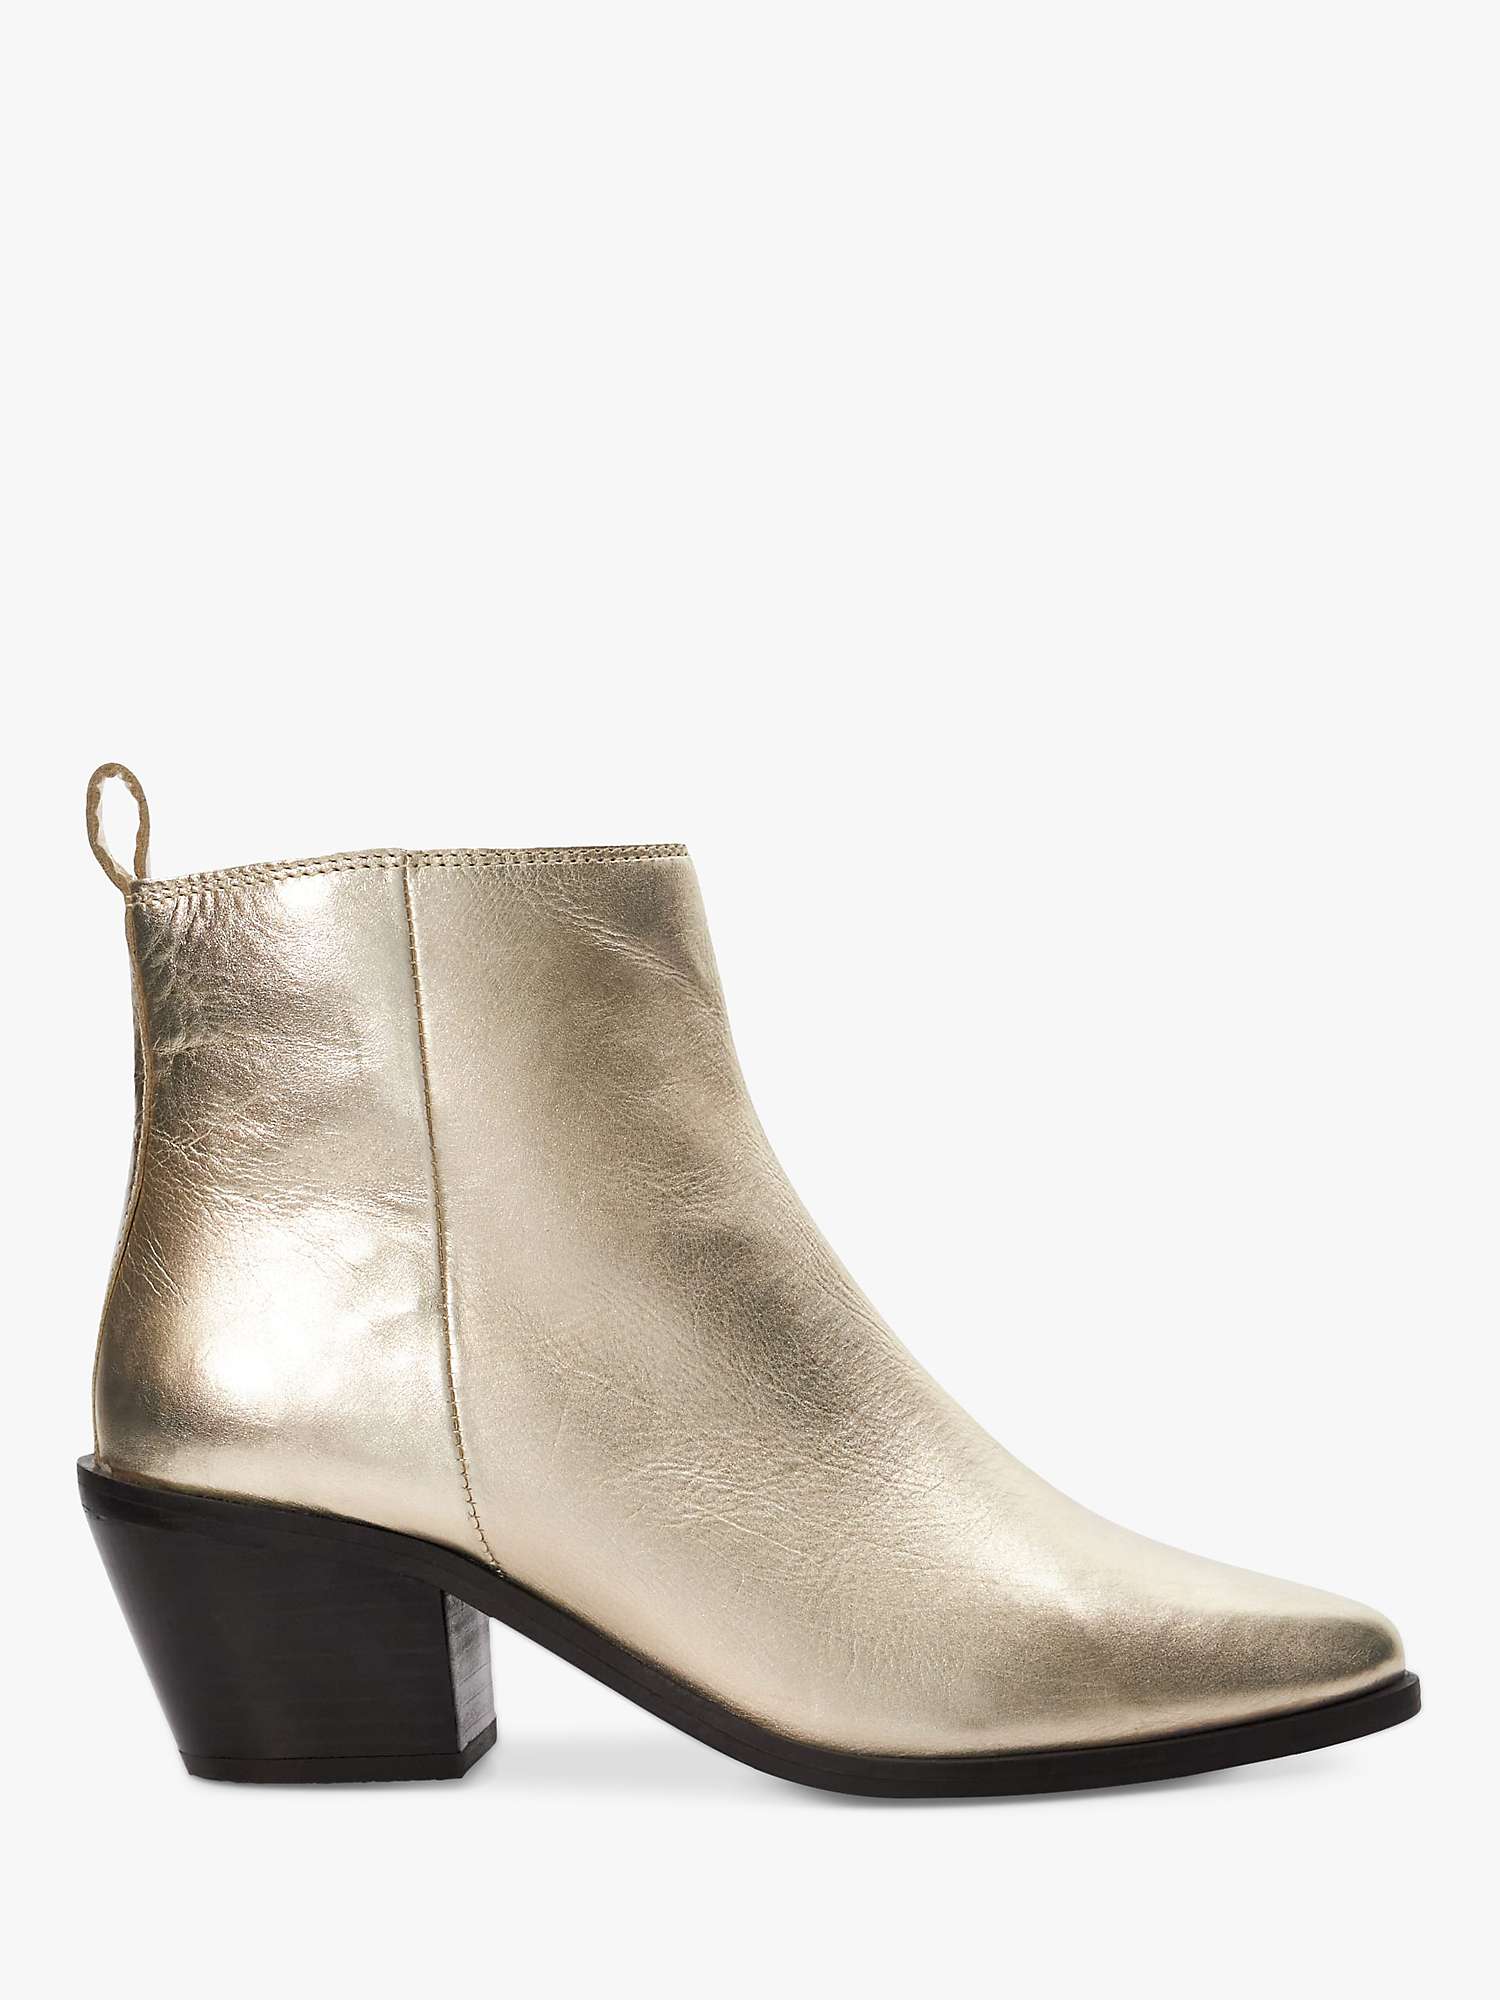 Buy Dune Papz Leather Ankle Boots Online at johnlewis.com